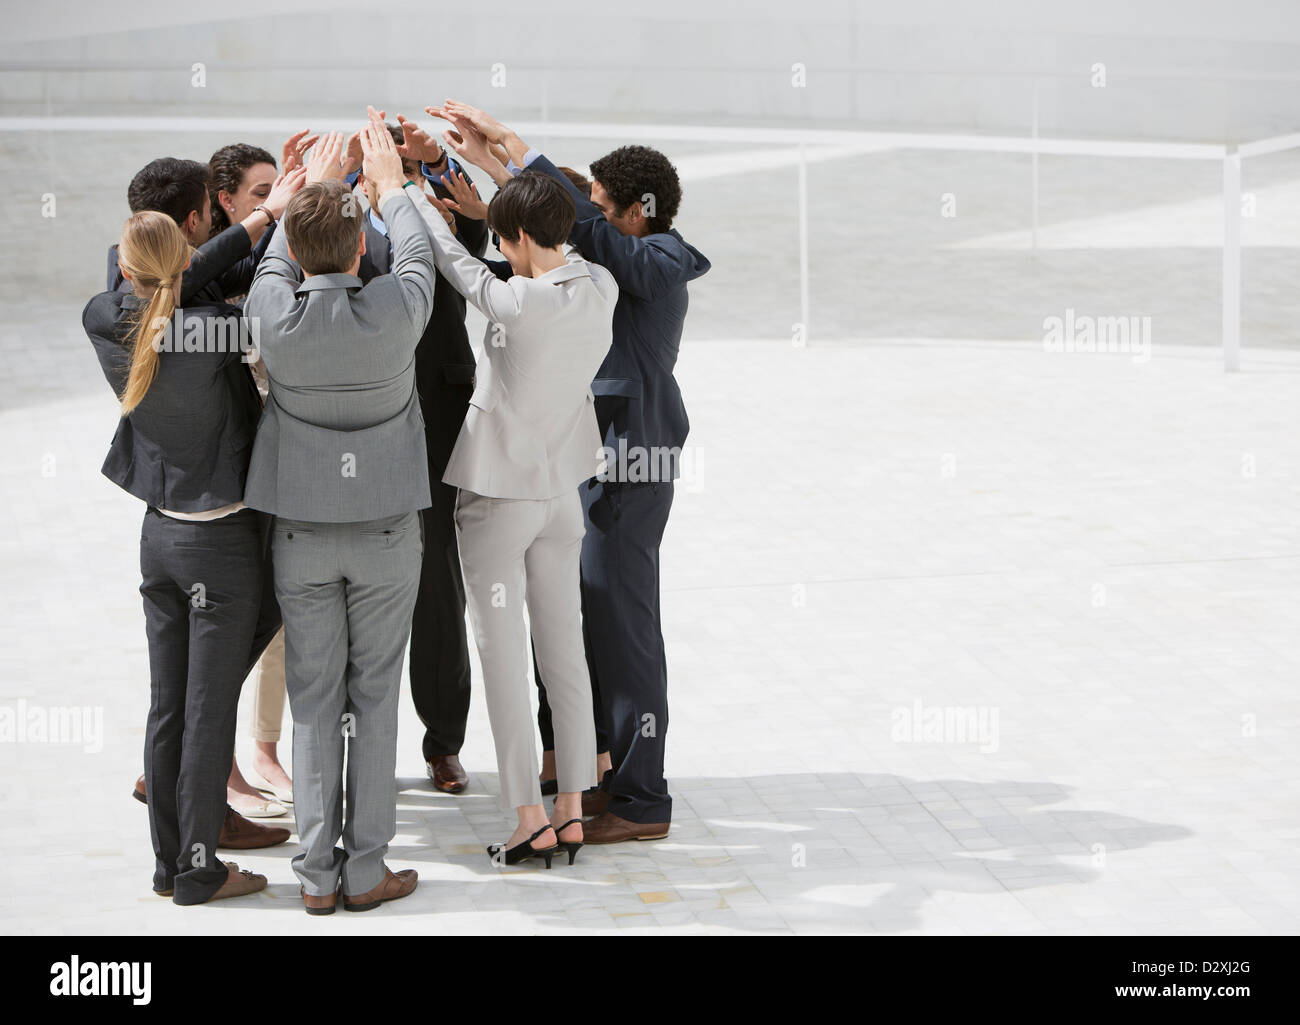 Business people standing in huddle with arms raised Stock Photo